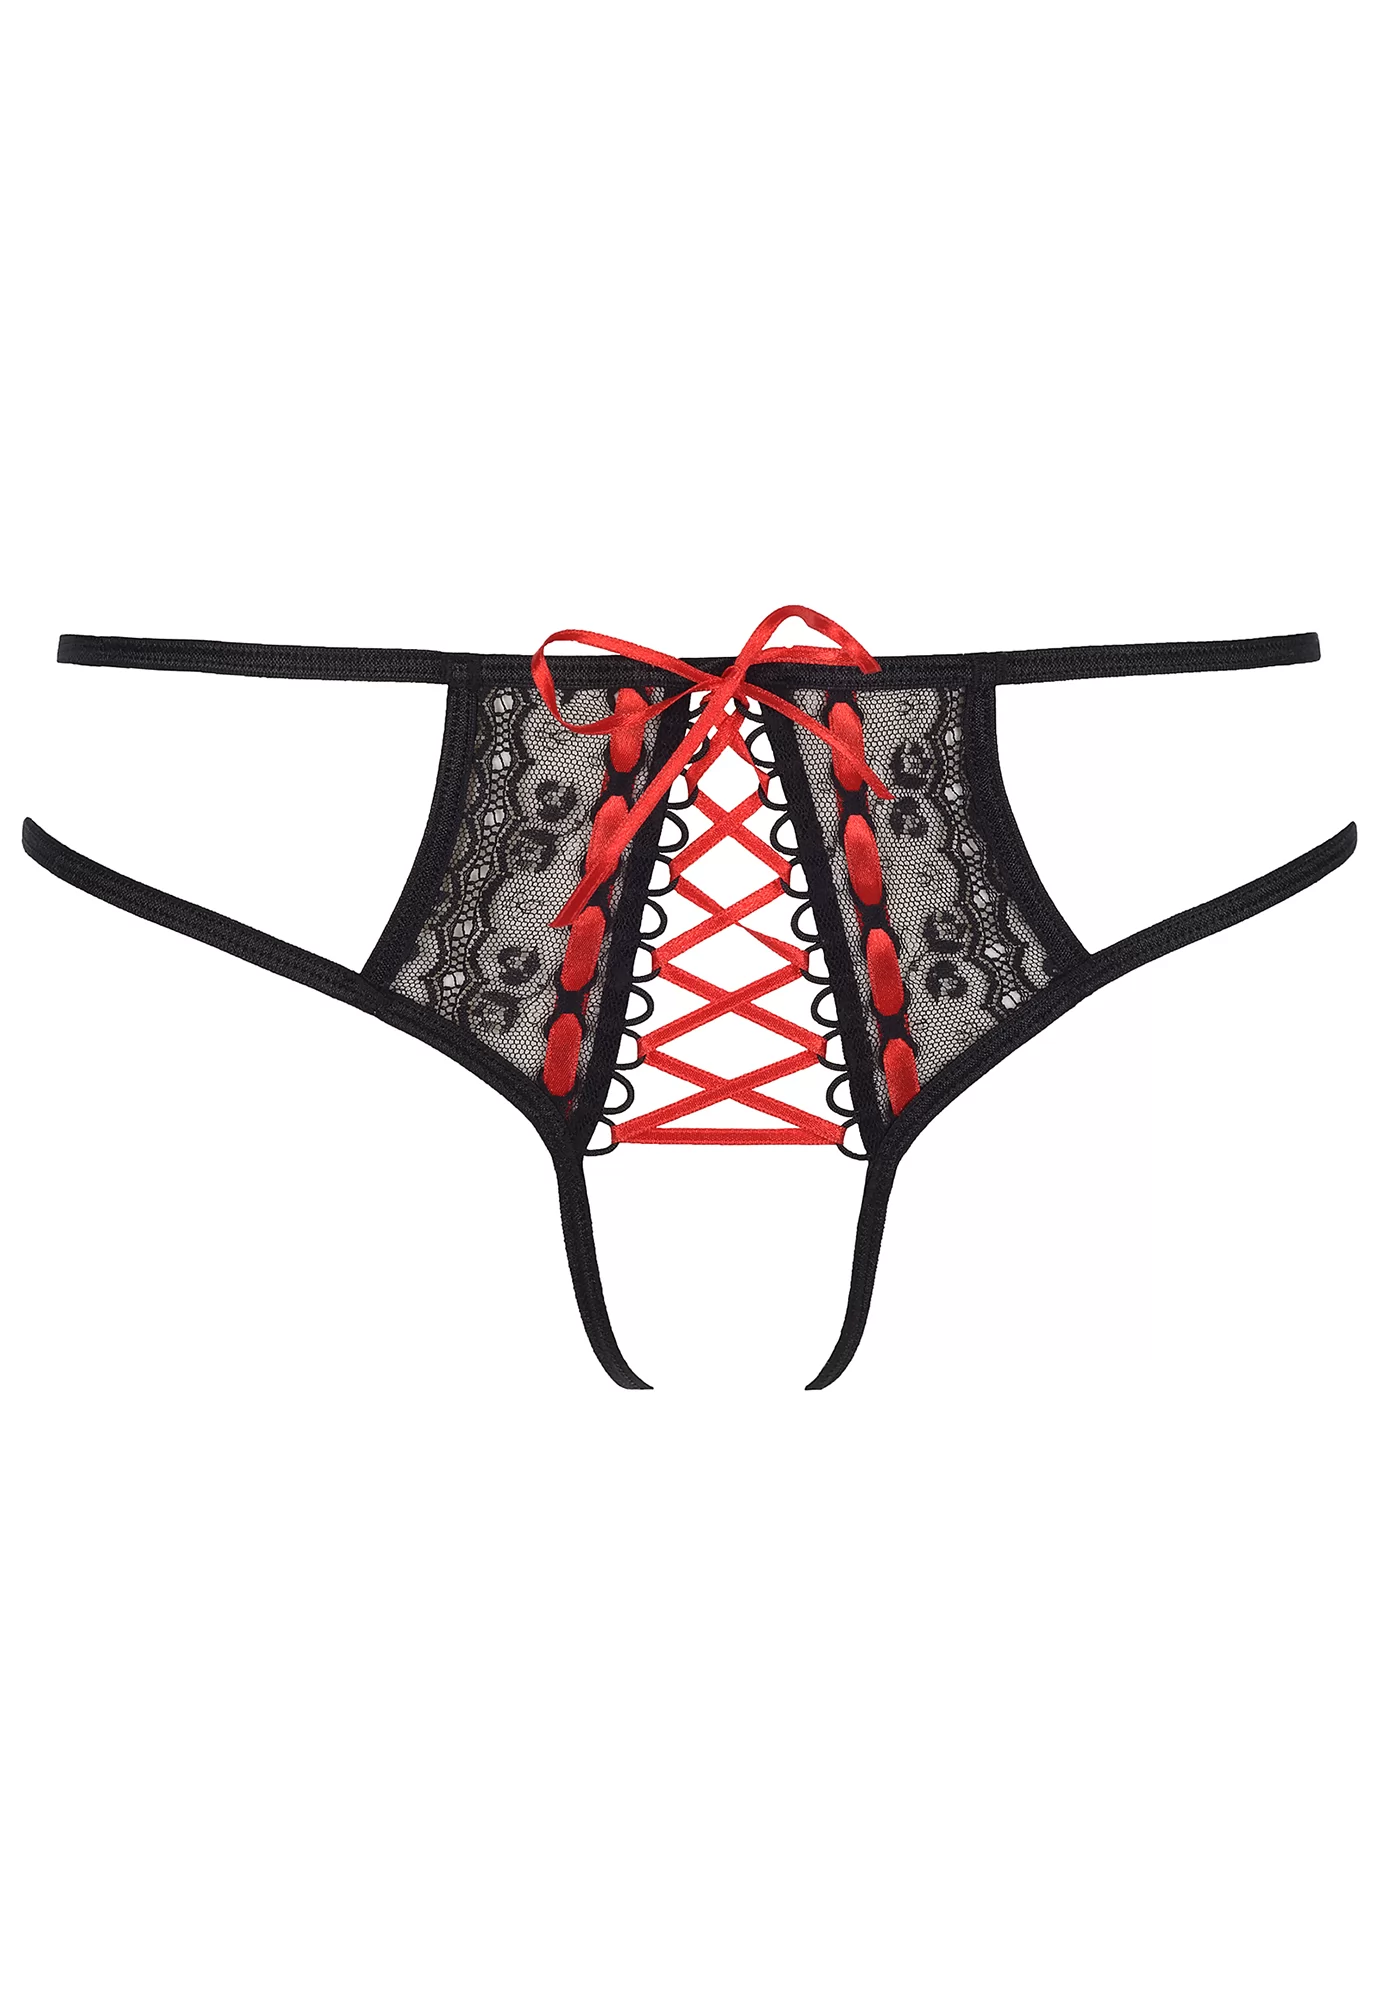 Red black laced open briefs